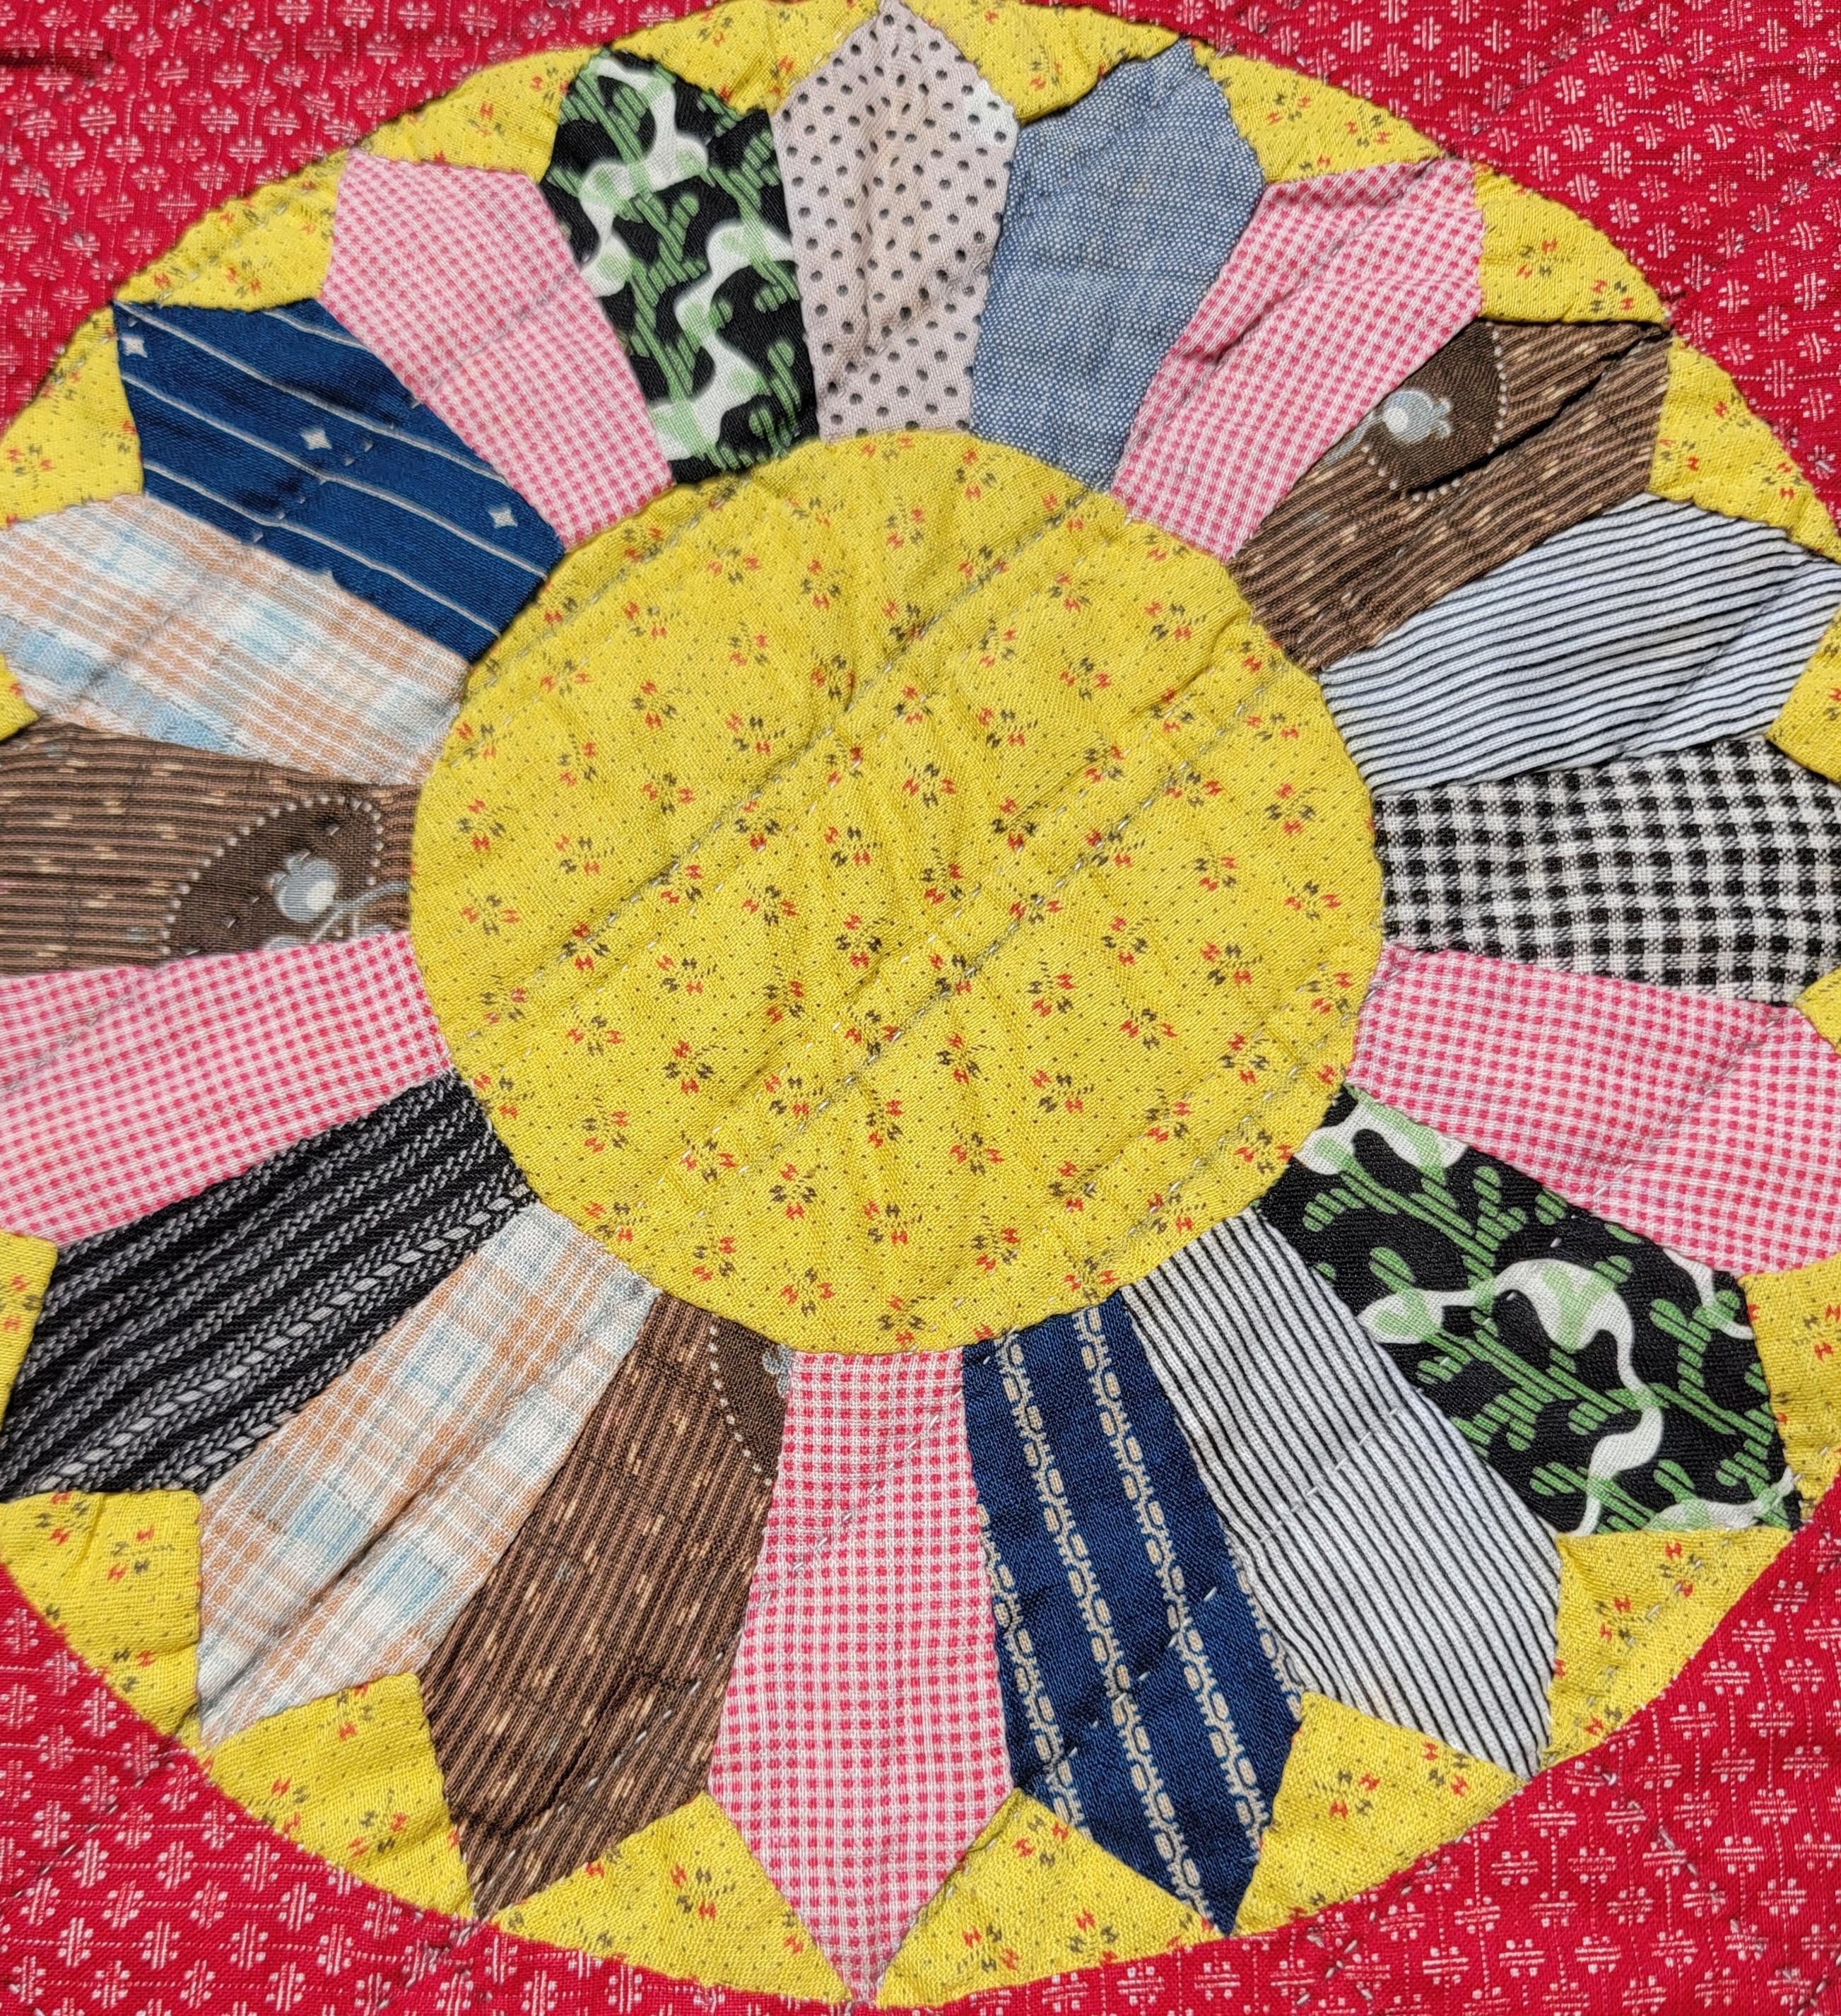 19Thc Folky cotton sunflower quilt from Ohio is in fine pristine condition.Such wonderful piece work and quilting.The red calico back round is fantastic. Condition is pristine.There is no wear what so ever on this unused quilt.